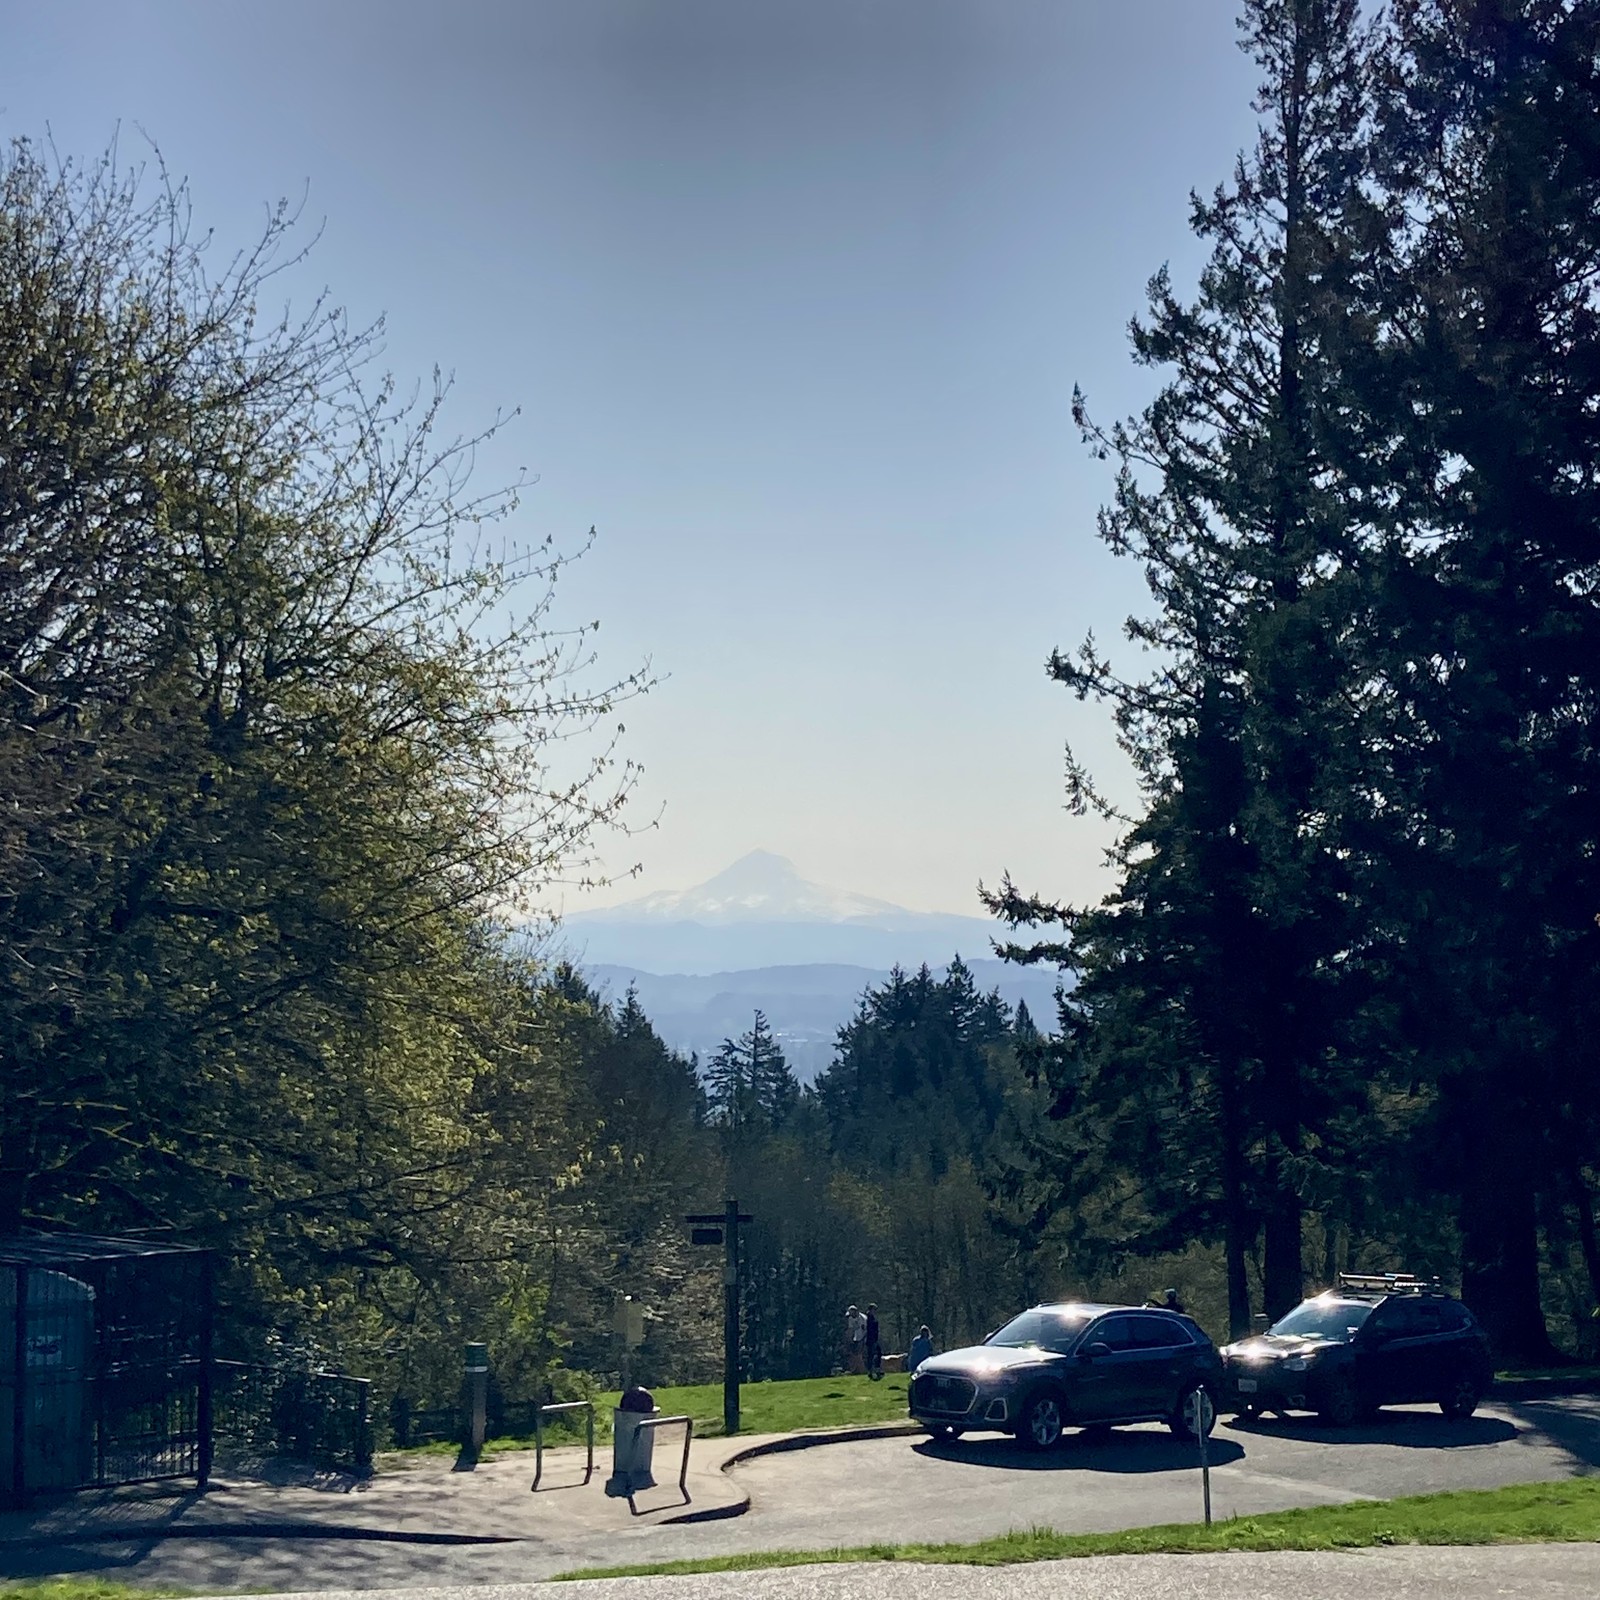 View of Mt. Hood from Council Crest park, zoomed slightly so the mountain appears larger. The sky is completely clear of clouds and the mountain is covered with snow. In the near mid-ground, on a grassy field behind some parked cars, is a small group of people and dogs